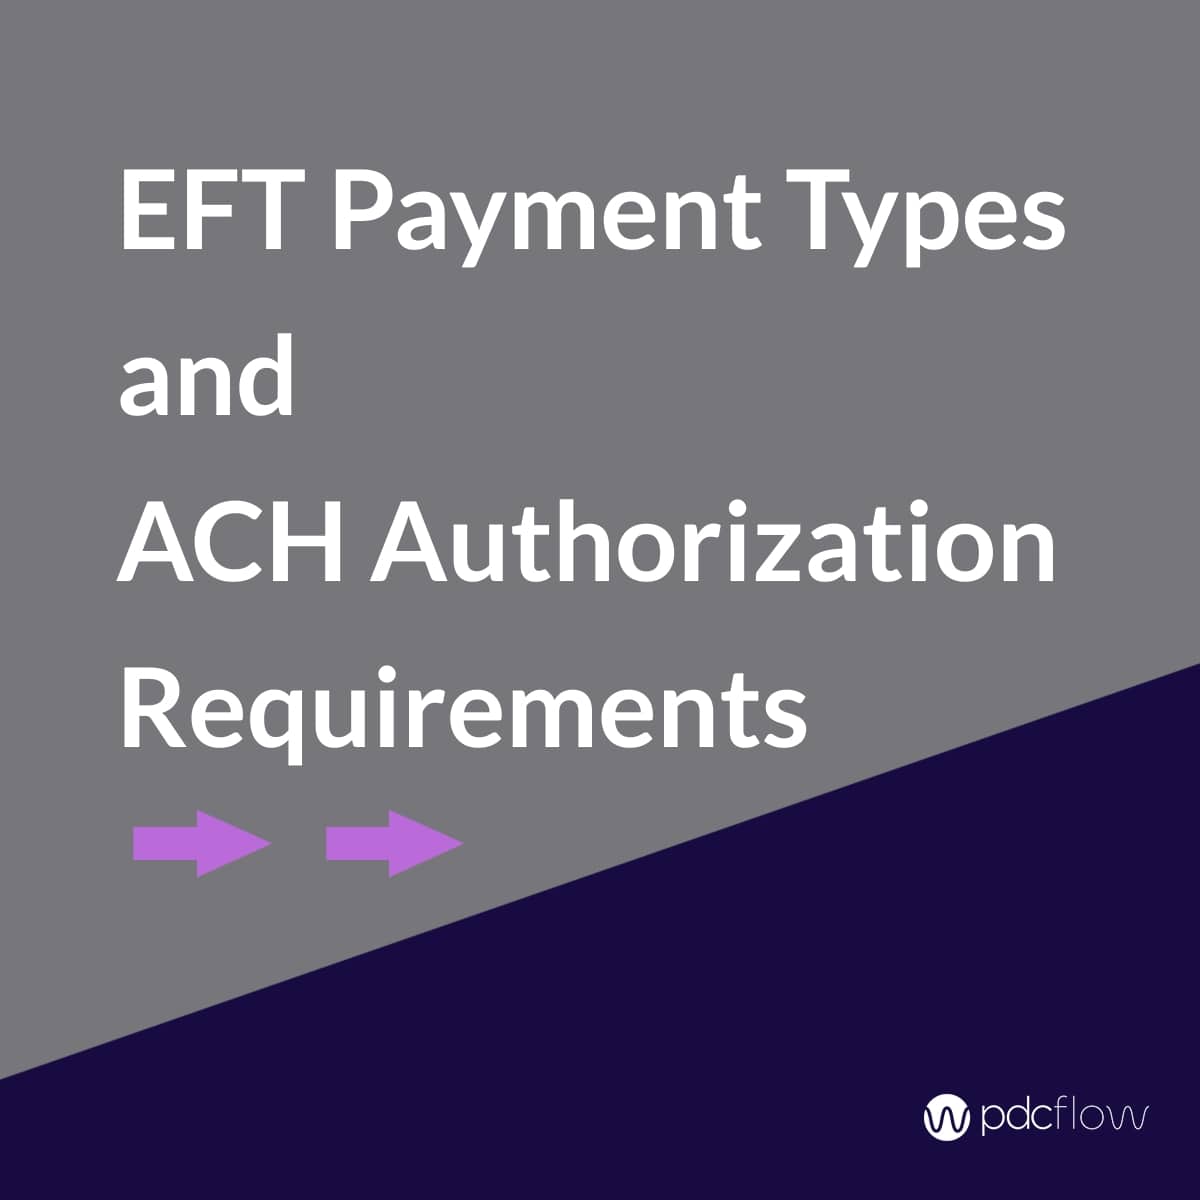 EFT Payment Types and ACH Authorization Requirements